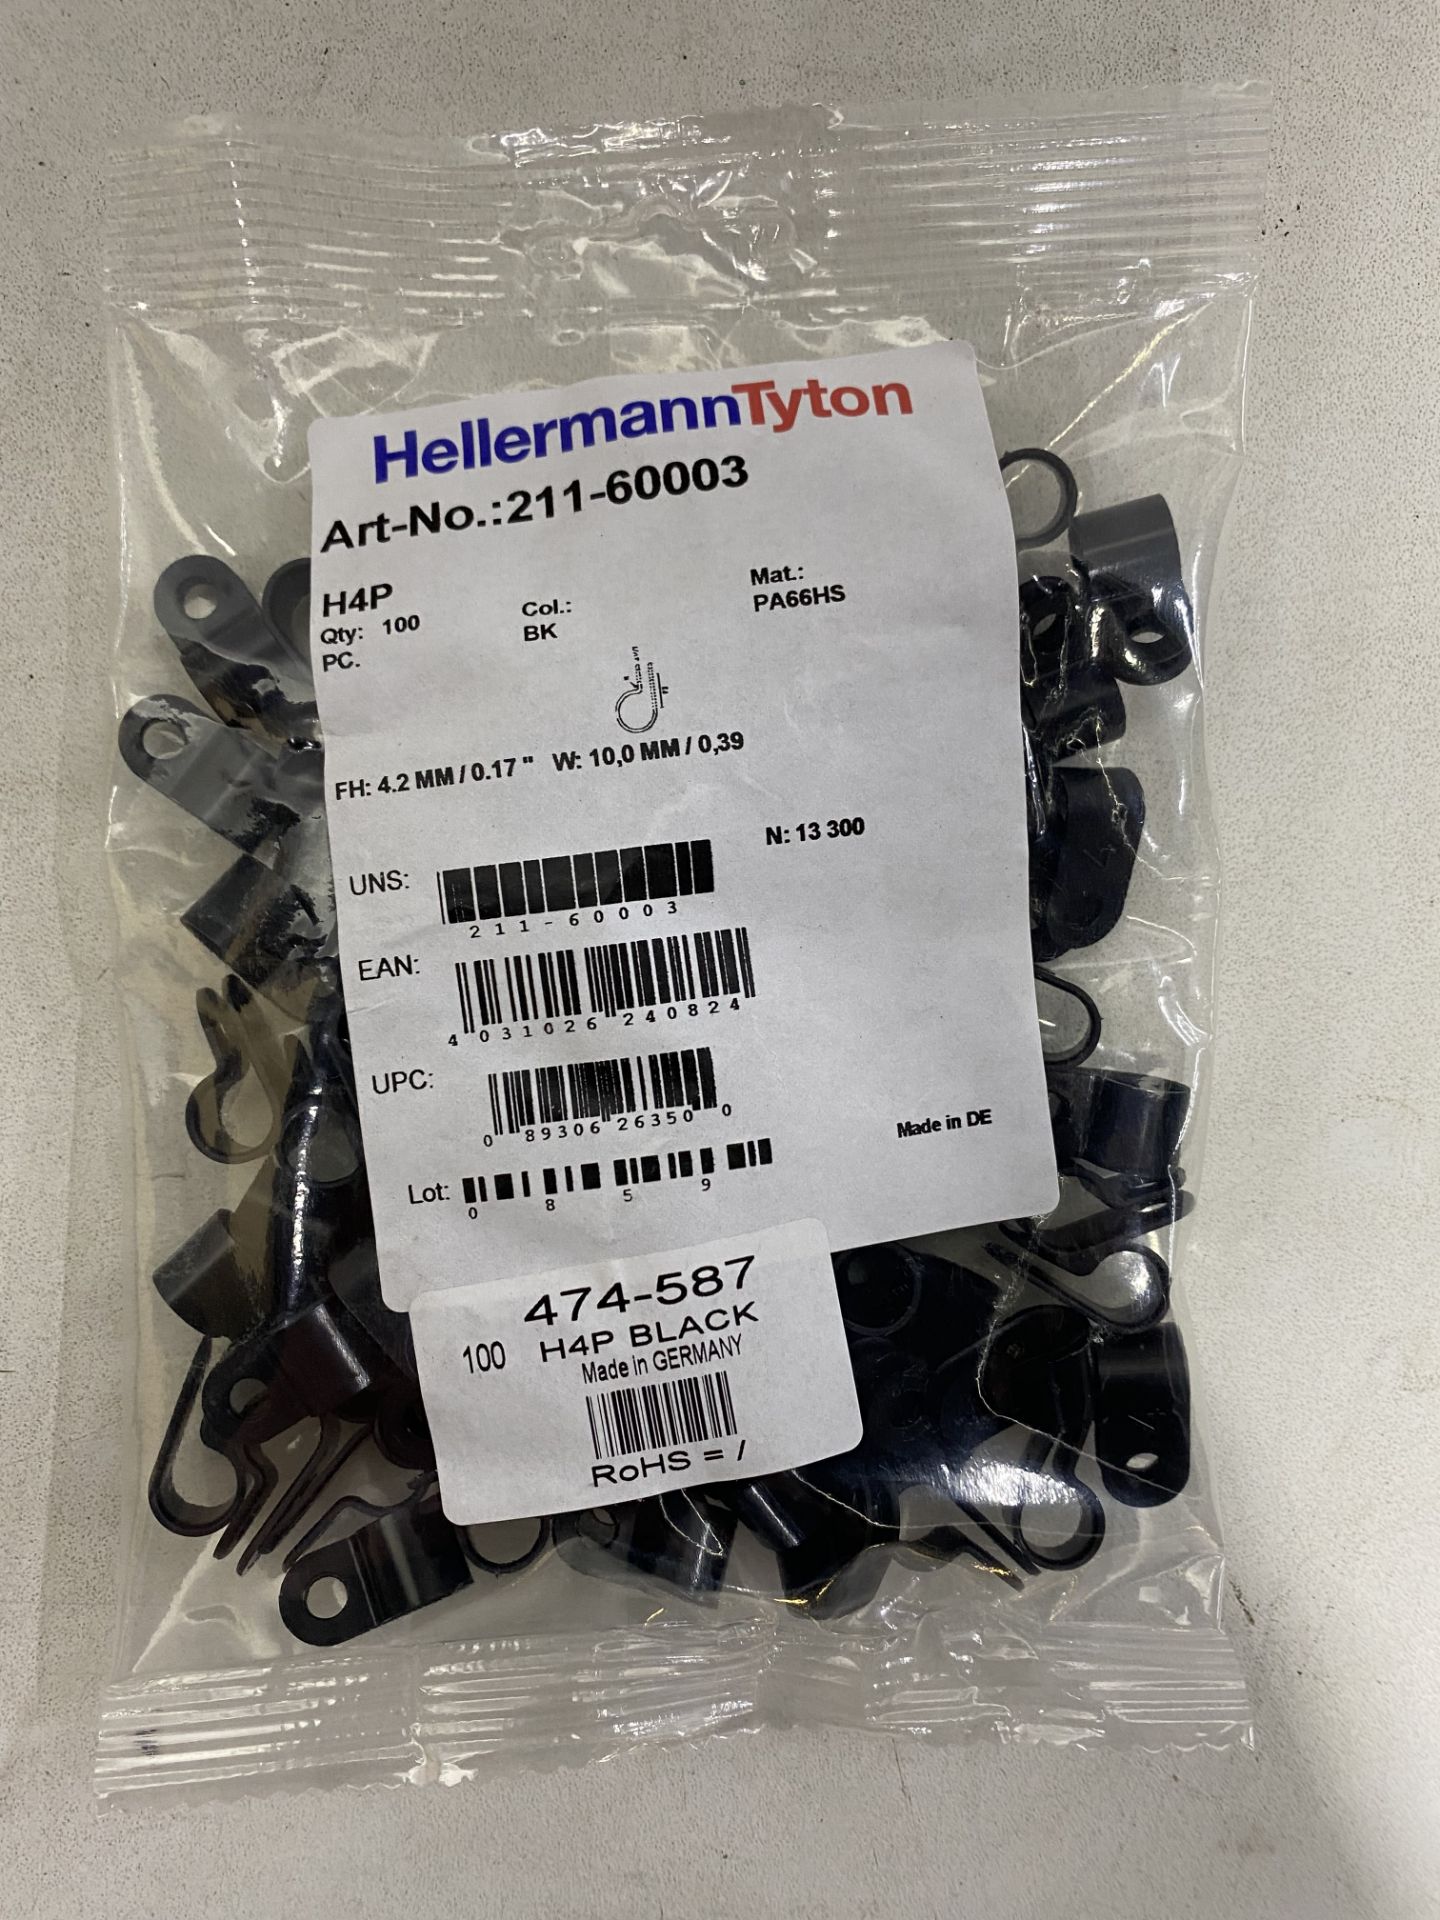 Approximately 10,000 x Hellermann Tyton 211-60003 Black Cable Clips/Clamps - Image 2 of 3